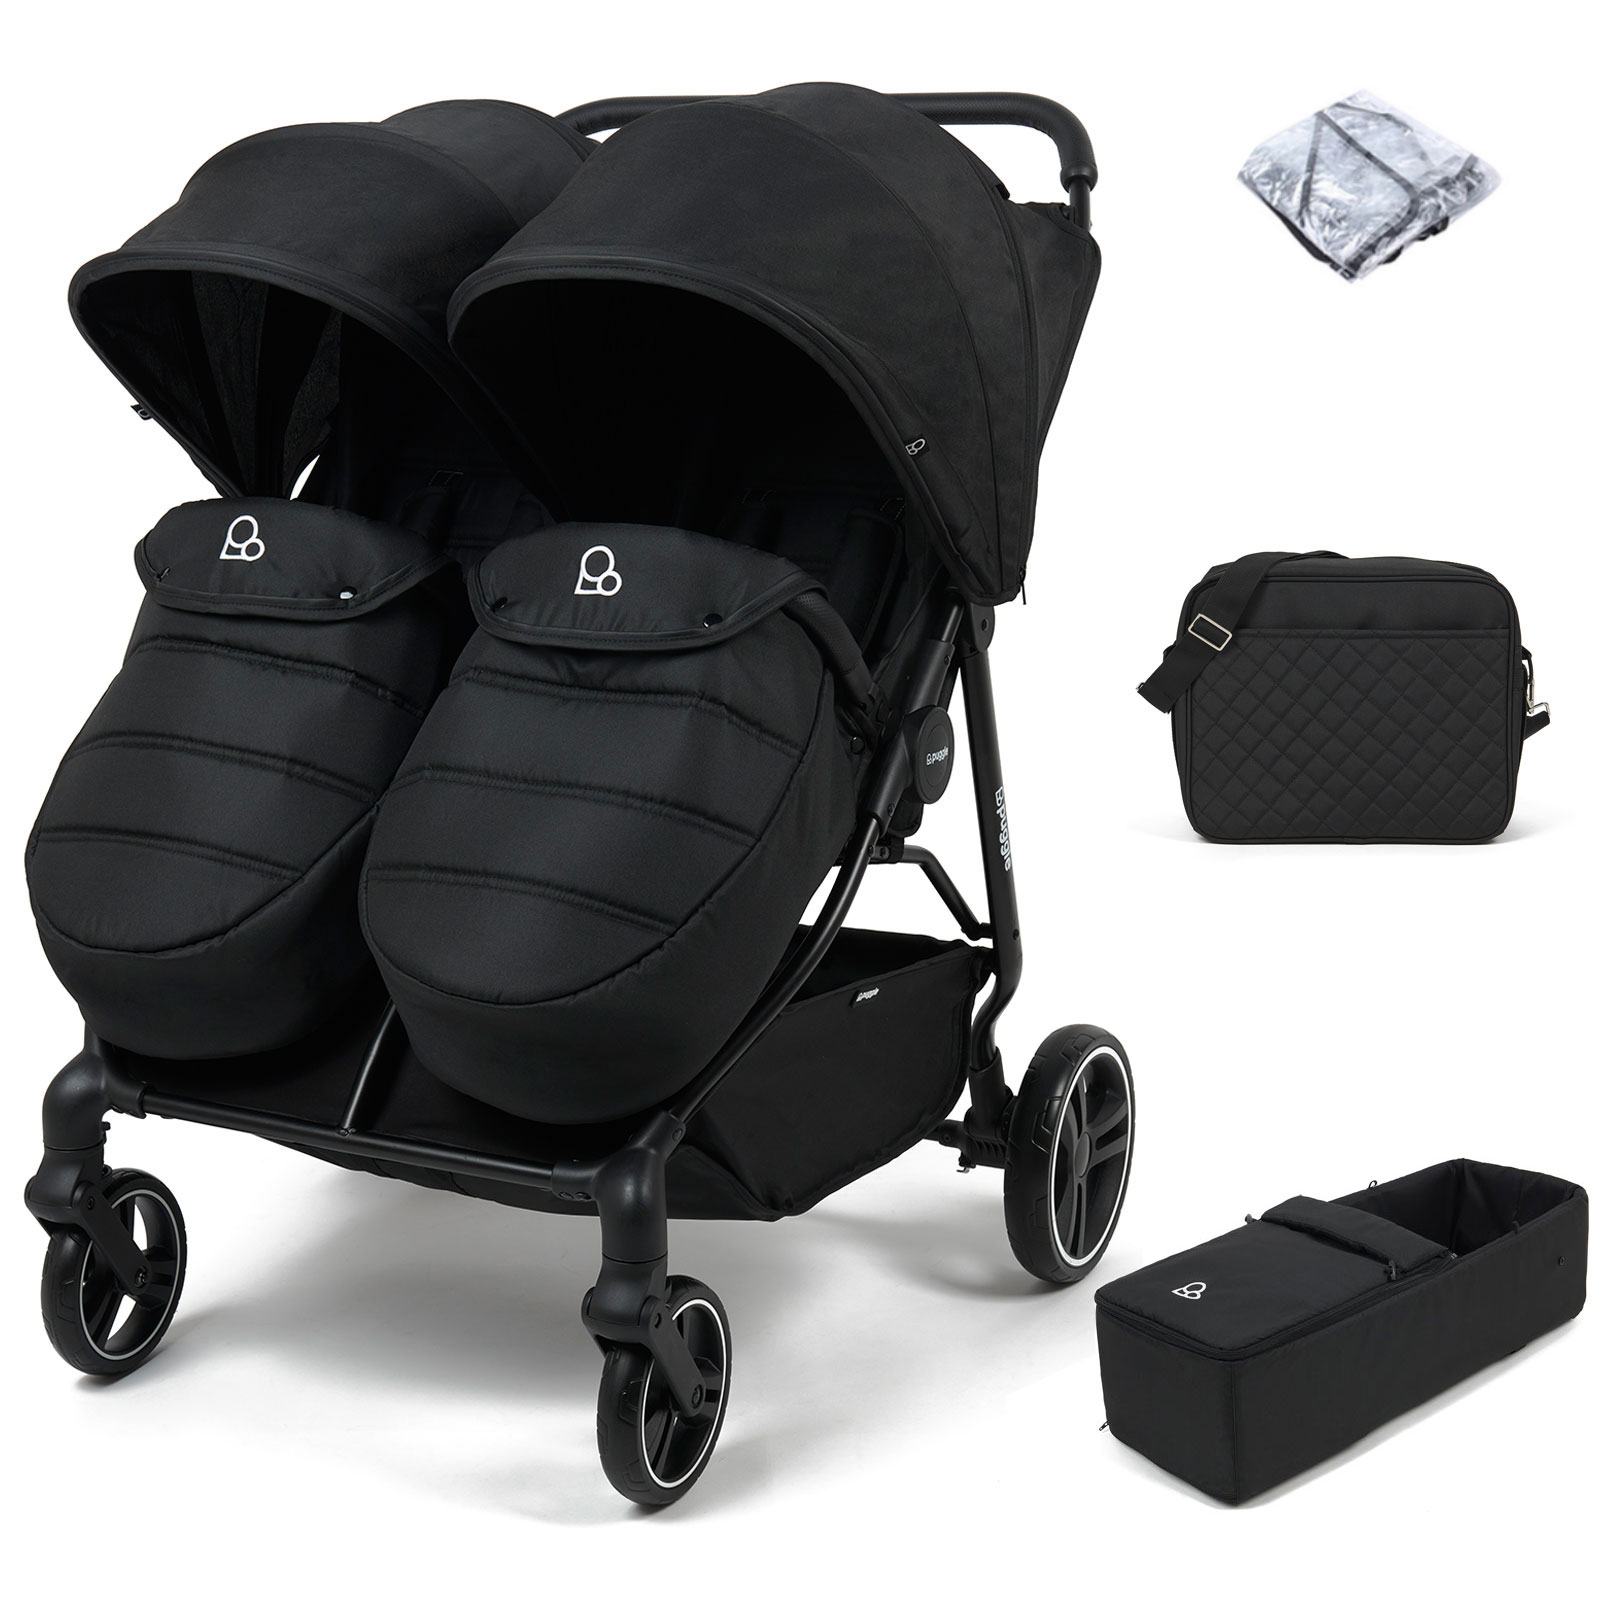 Puggle Urban City Easyfold Twin Pushchair with Footmuff, Soft Carrycot & Changing Bag - Storm Black